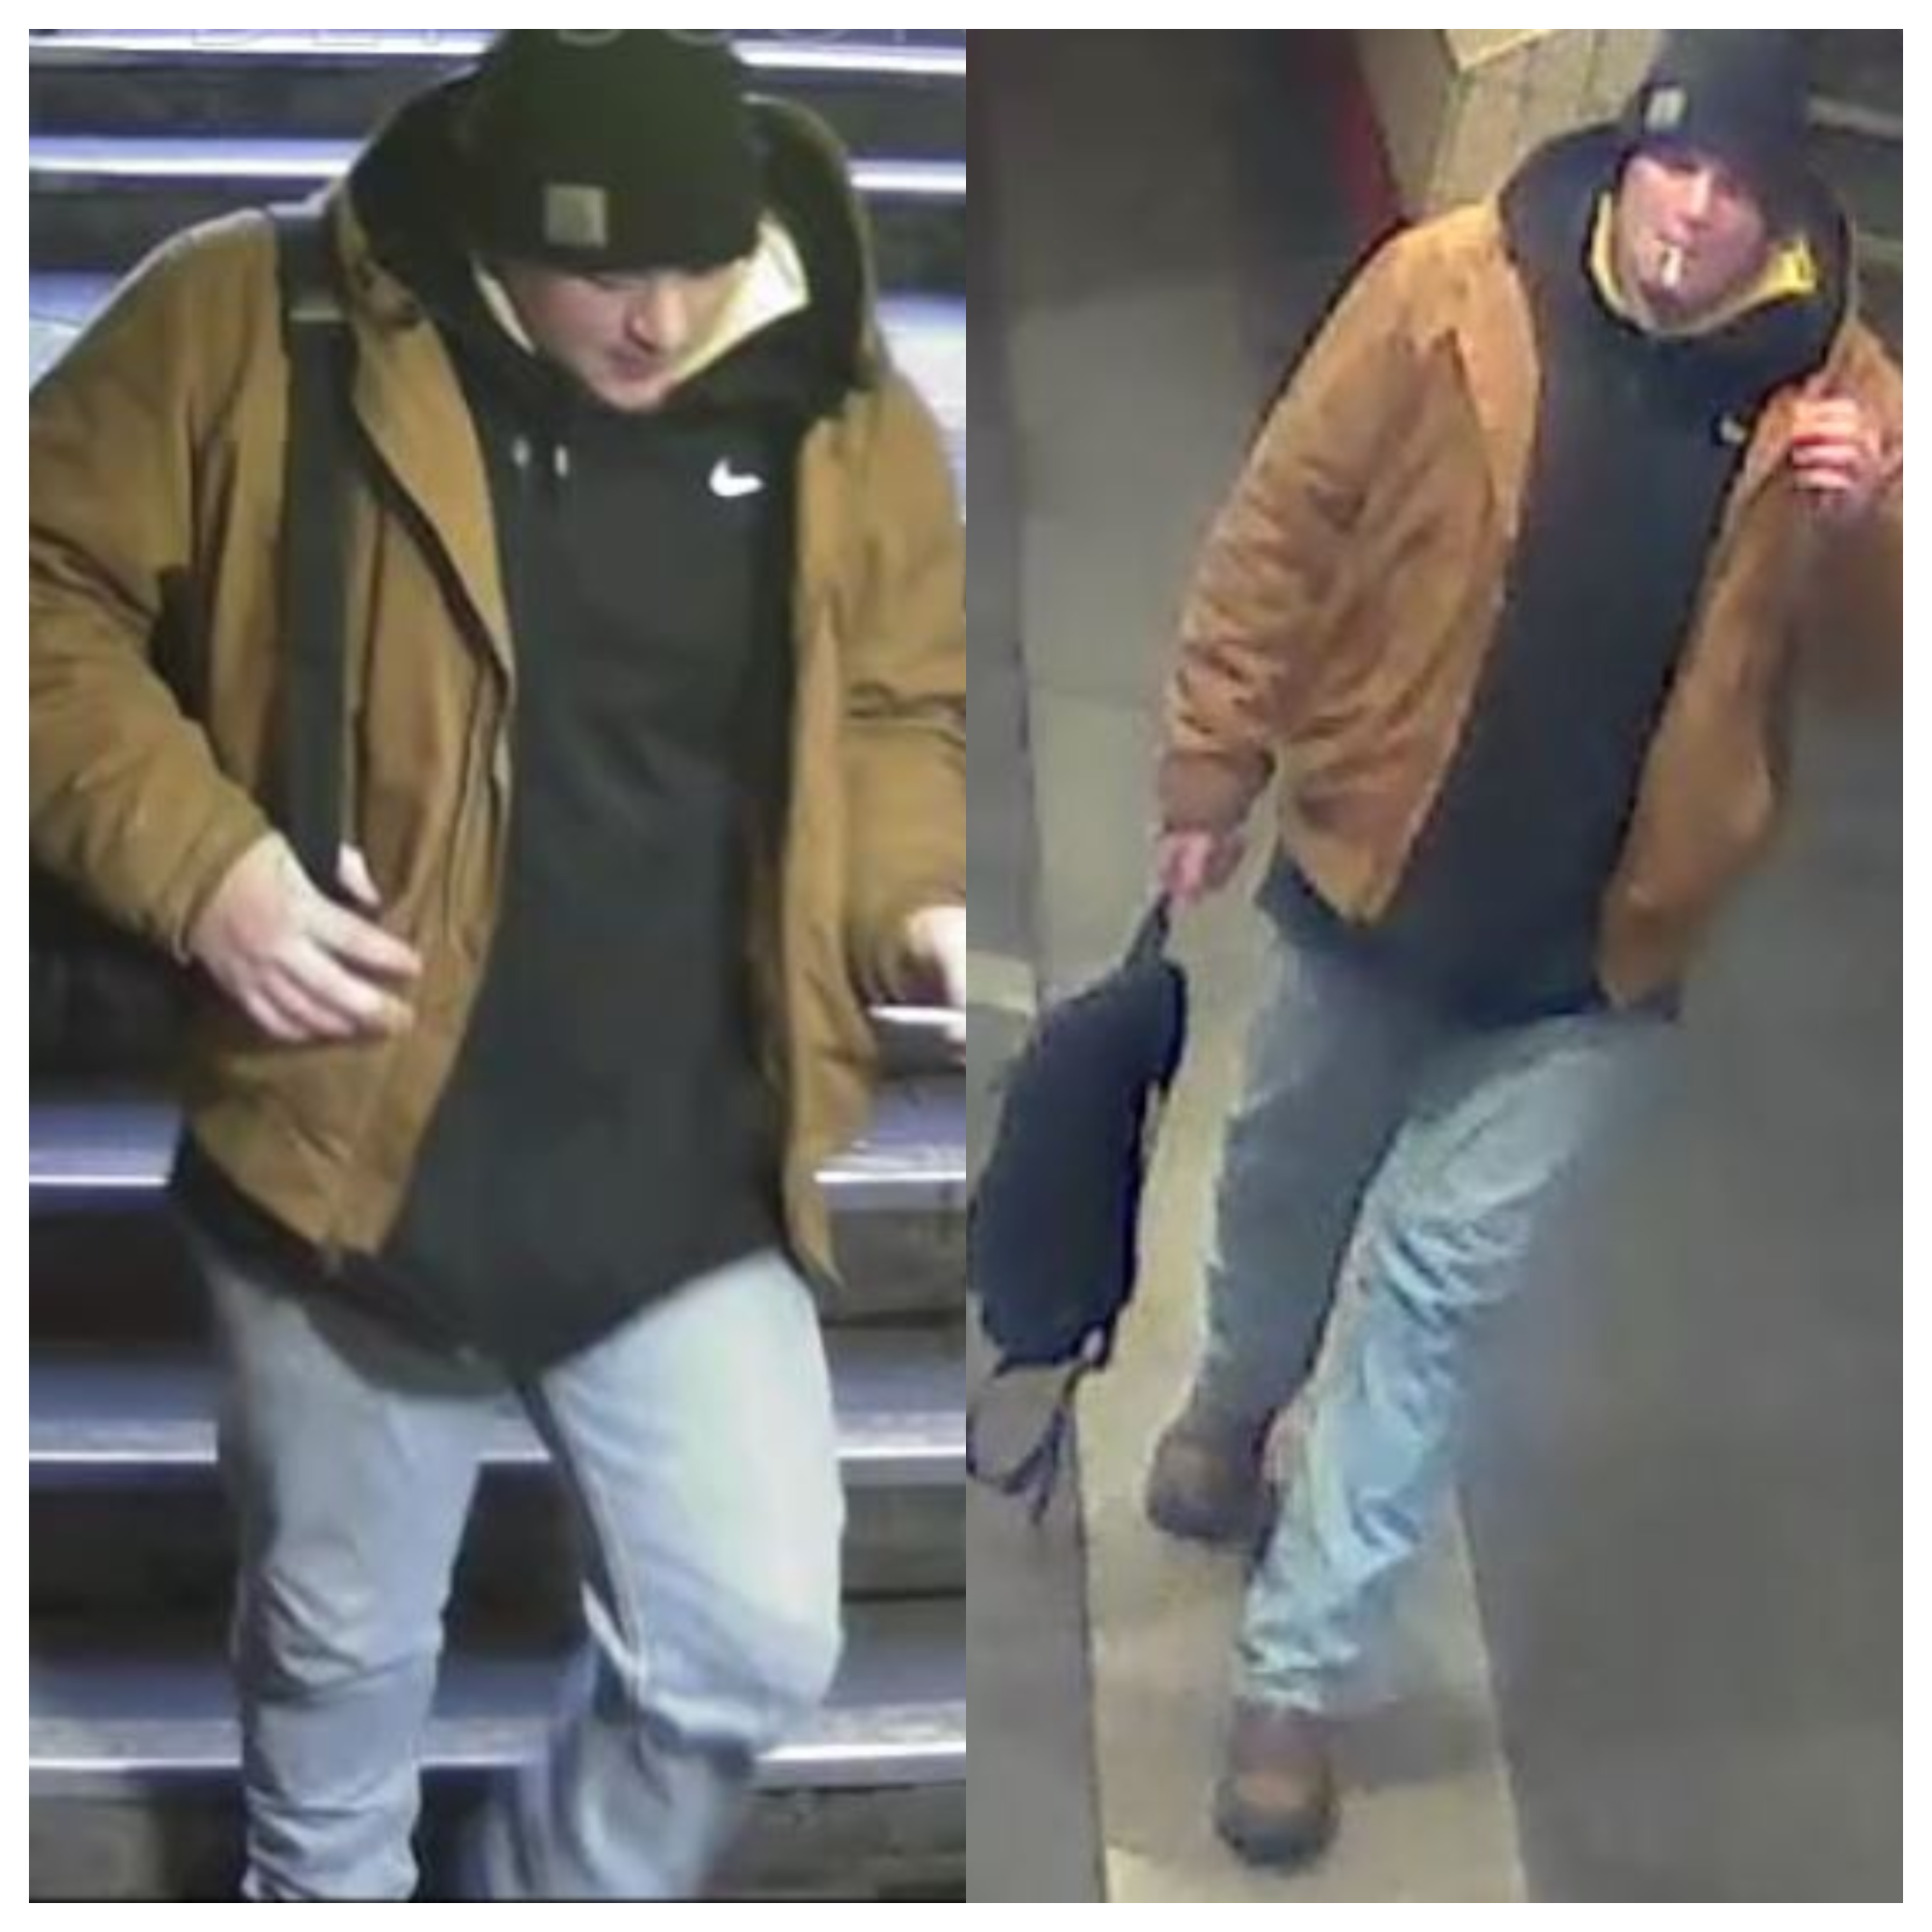 alt = two angles of a suspect wanted by MBTA Transit Police. The suspect appears to be a white man wearing jeans, boots, a black hat, a black Nike sweatshirt, and a brown jacket, who looks to be carrying a black backpack.